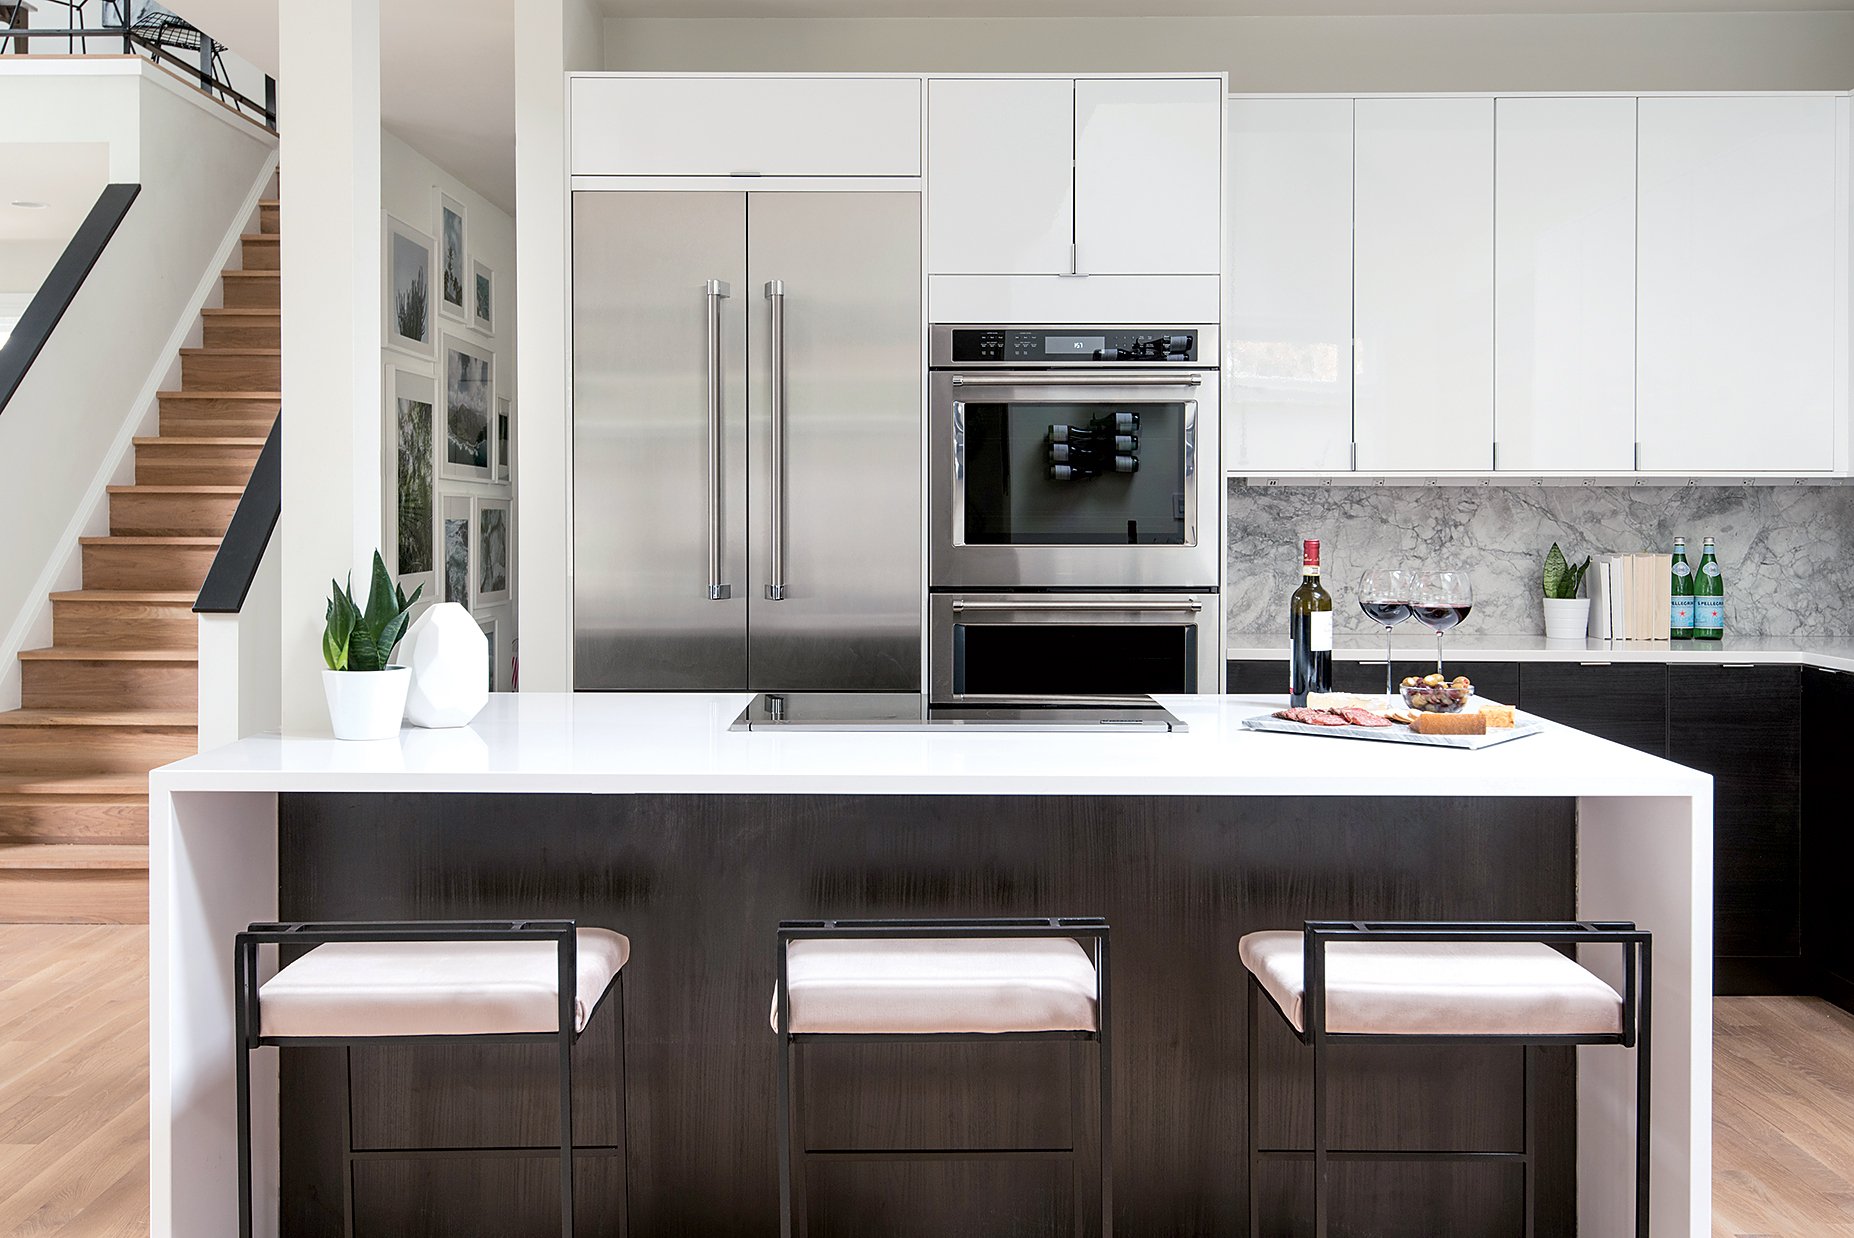 Metzler and her husband designed and built their kitchen using Ikea cabinetry